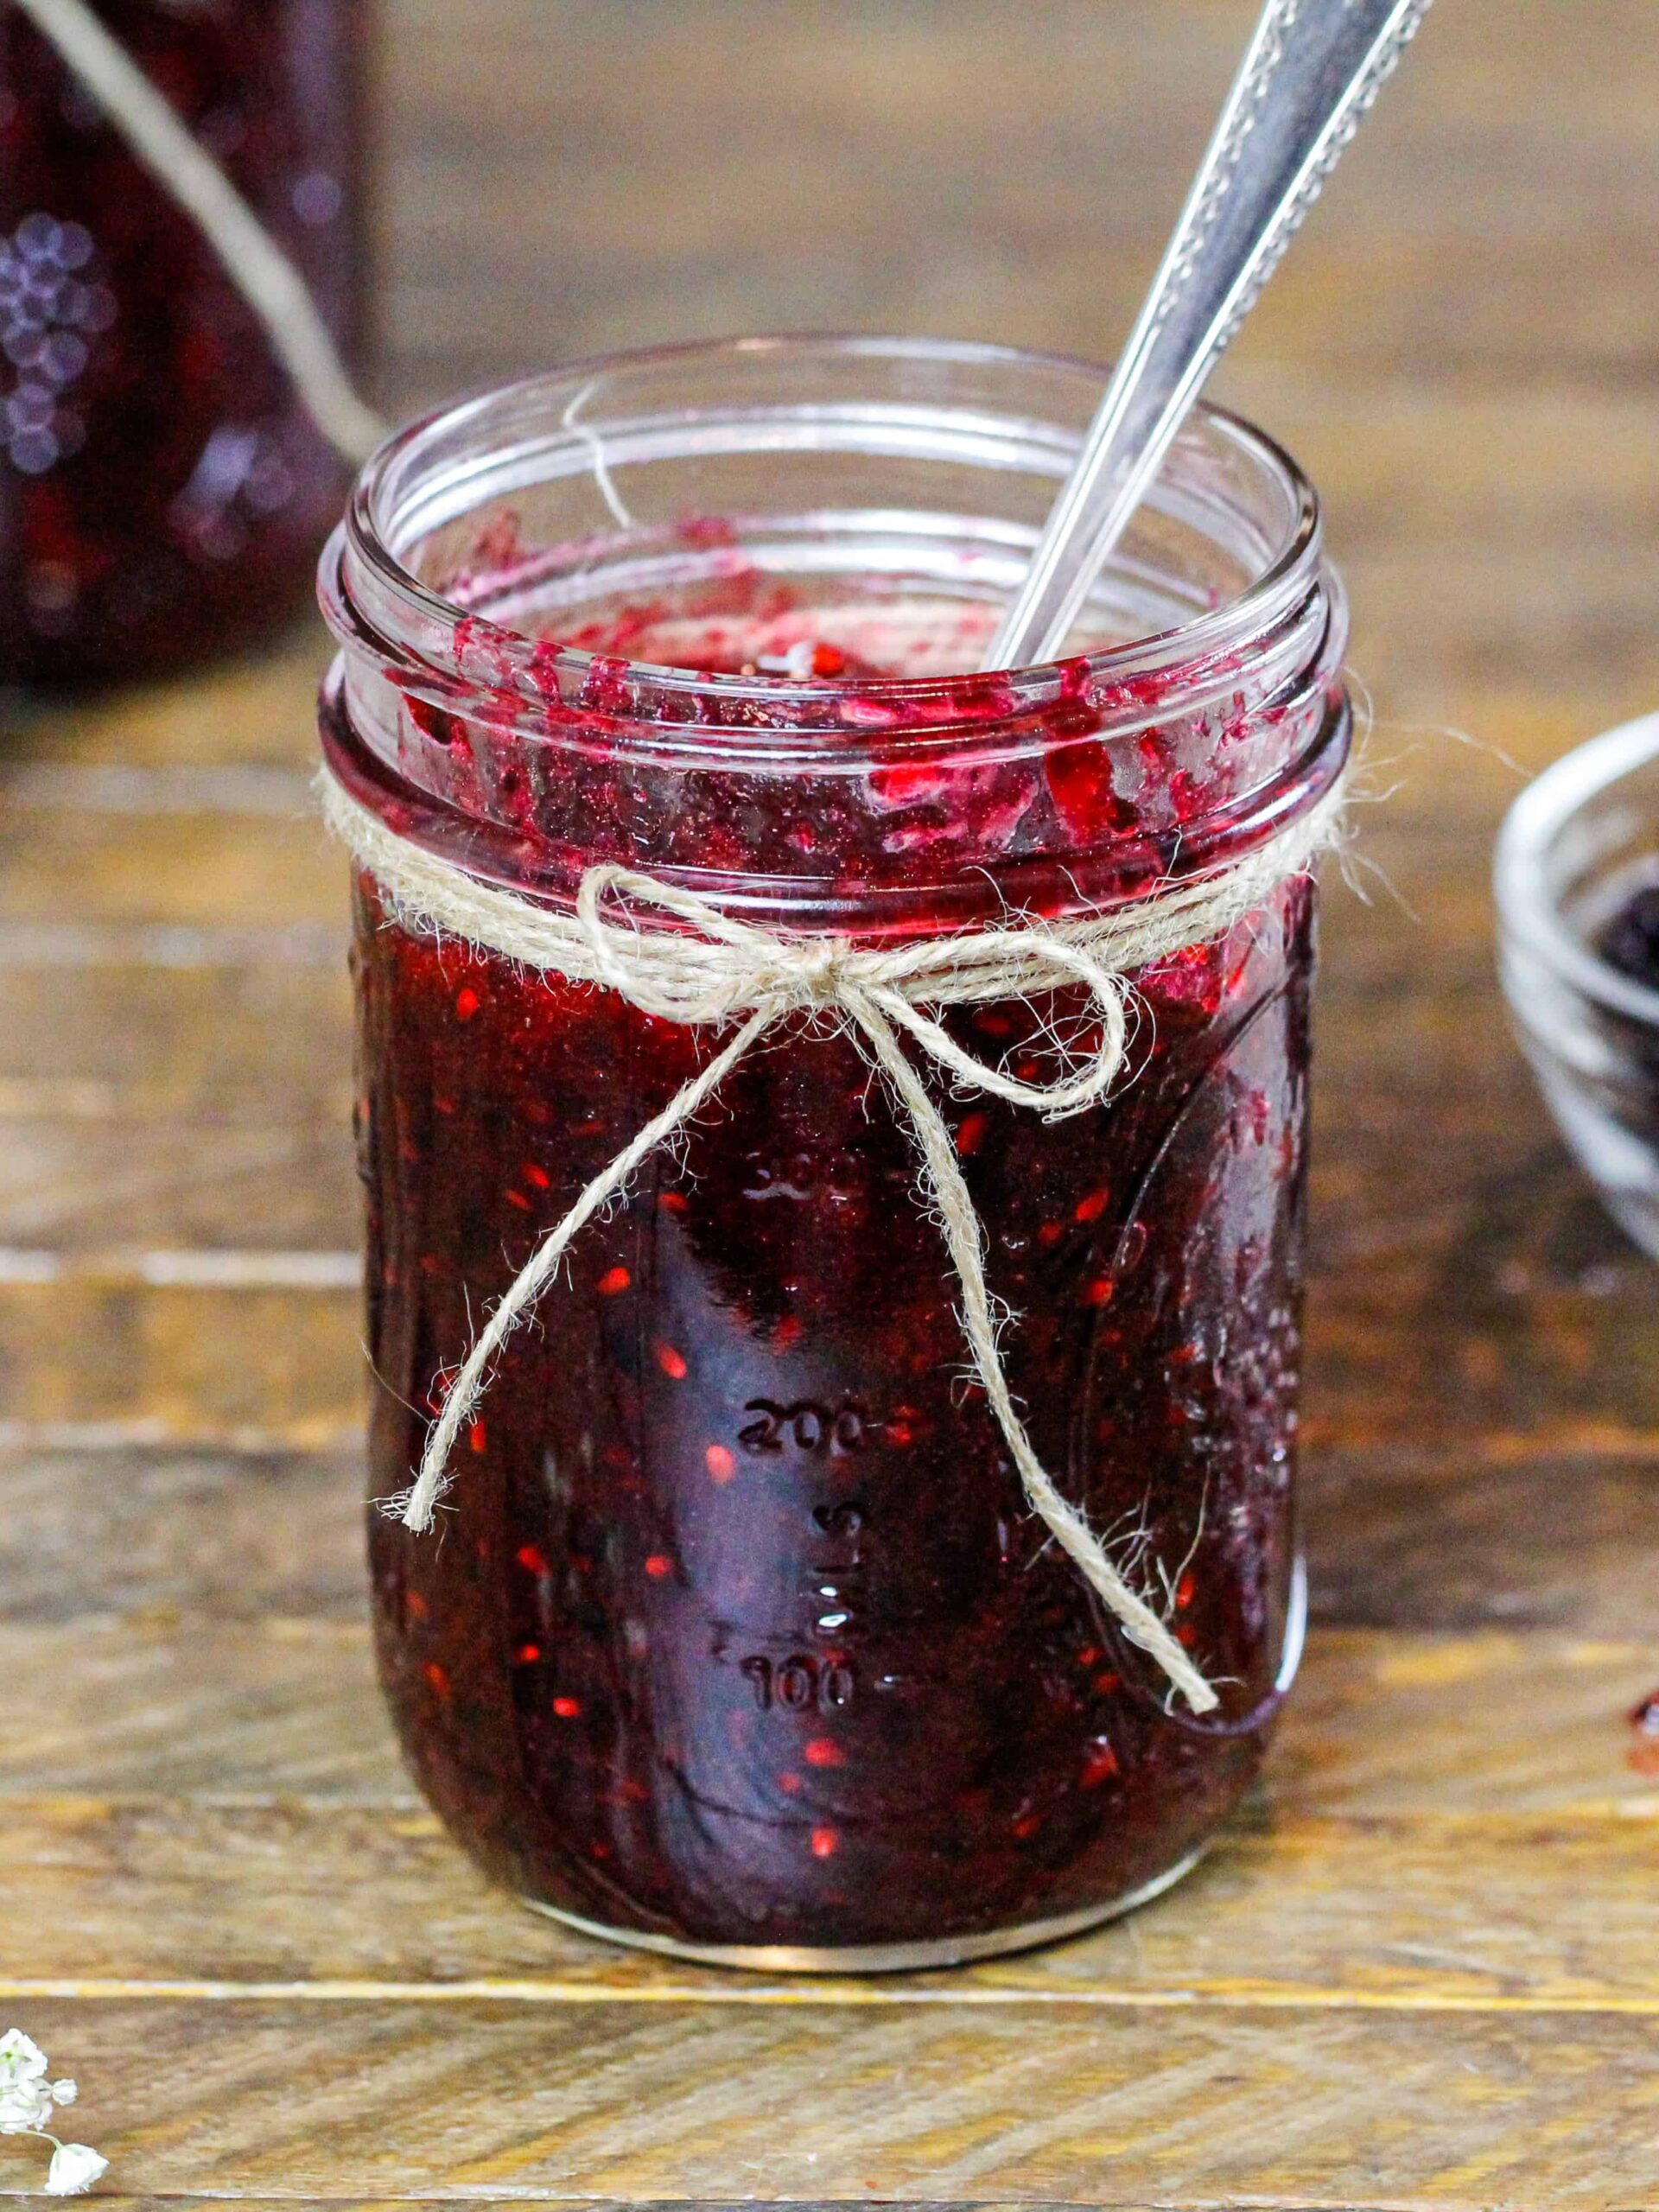 image of blackberry freezer jam that has set and is ready to be eaten